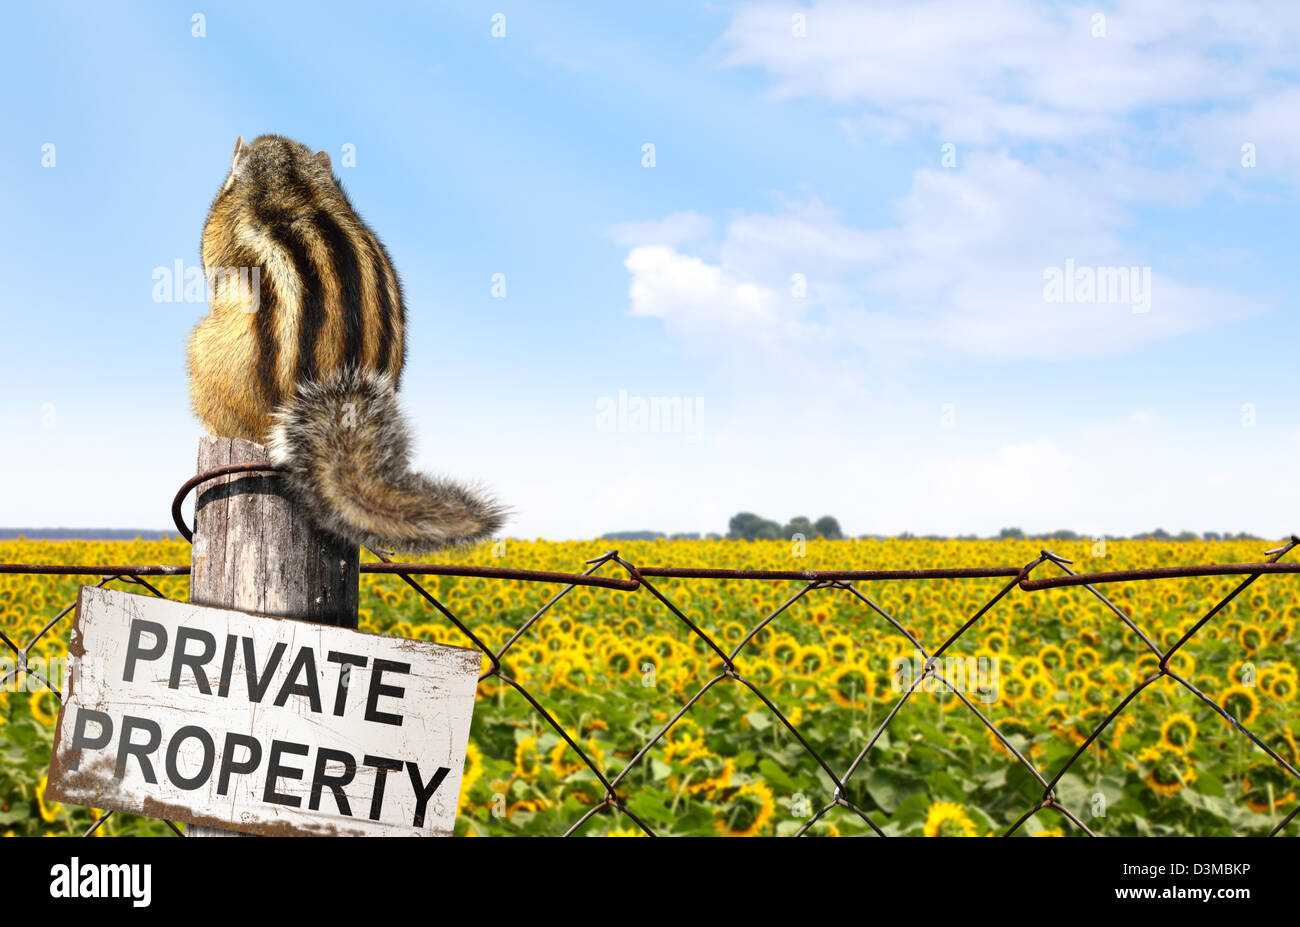 Chipmunk sits on a fence near sunflowers field, interdiction concept Stock Photo